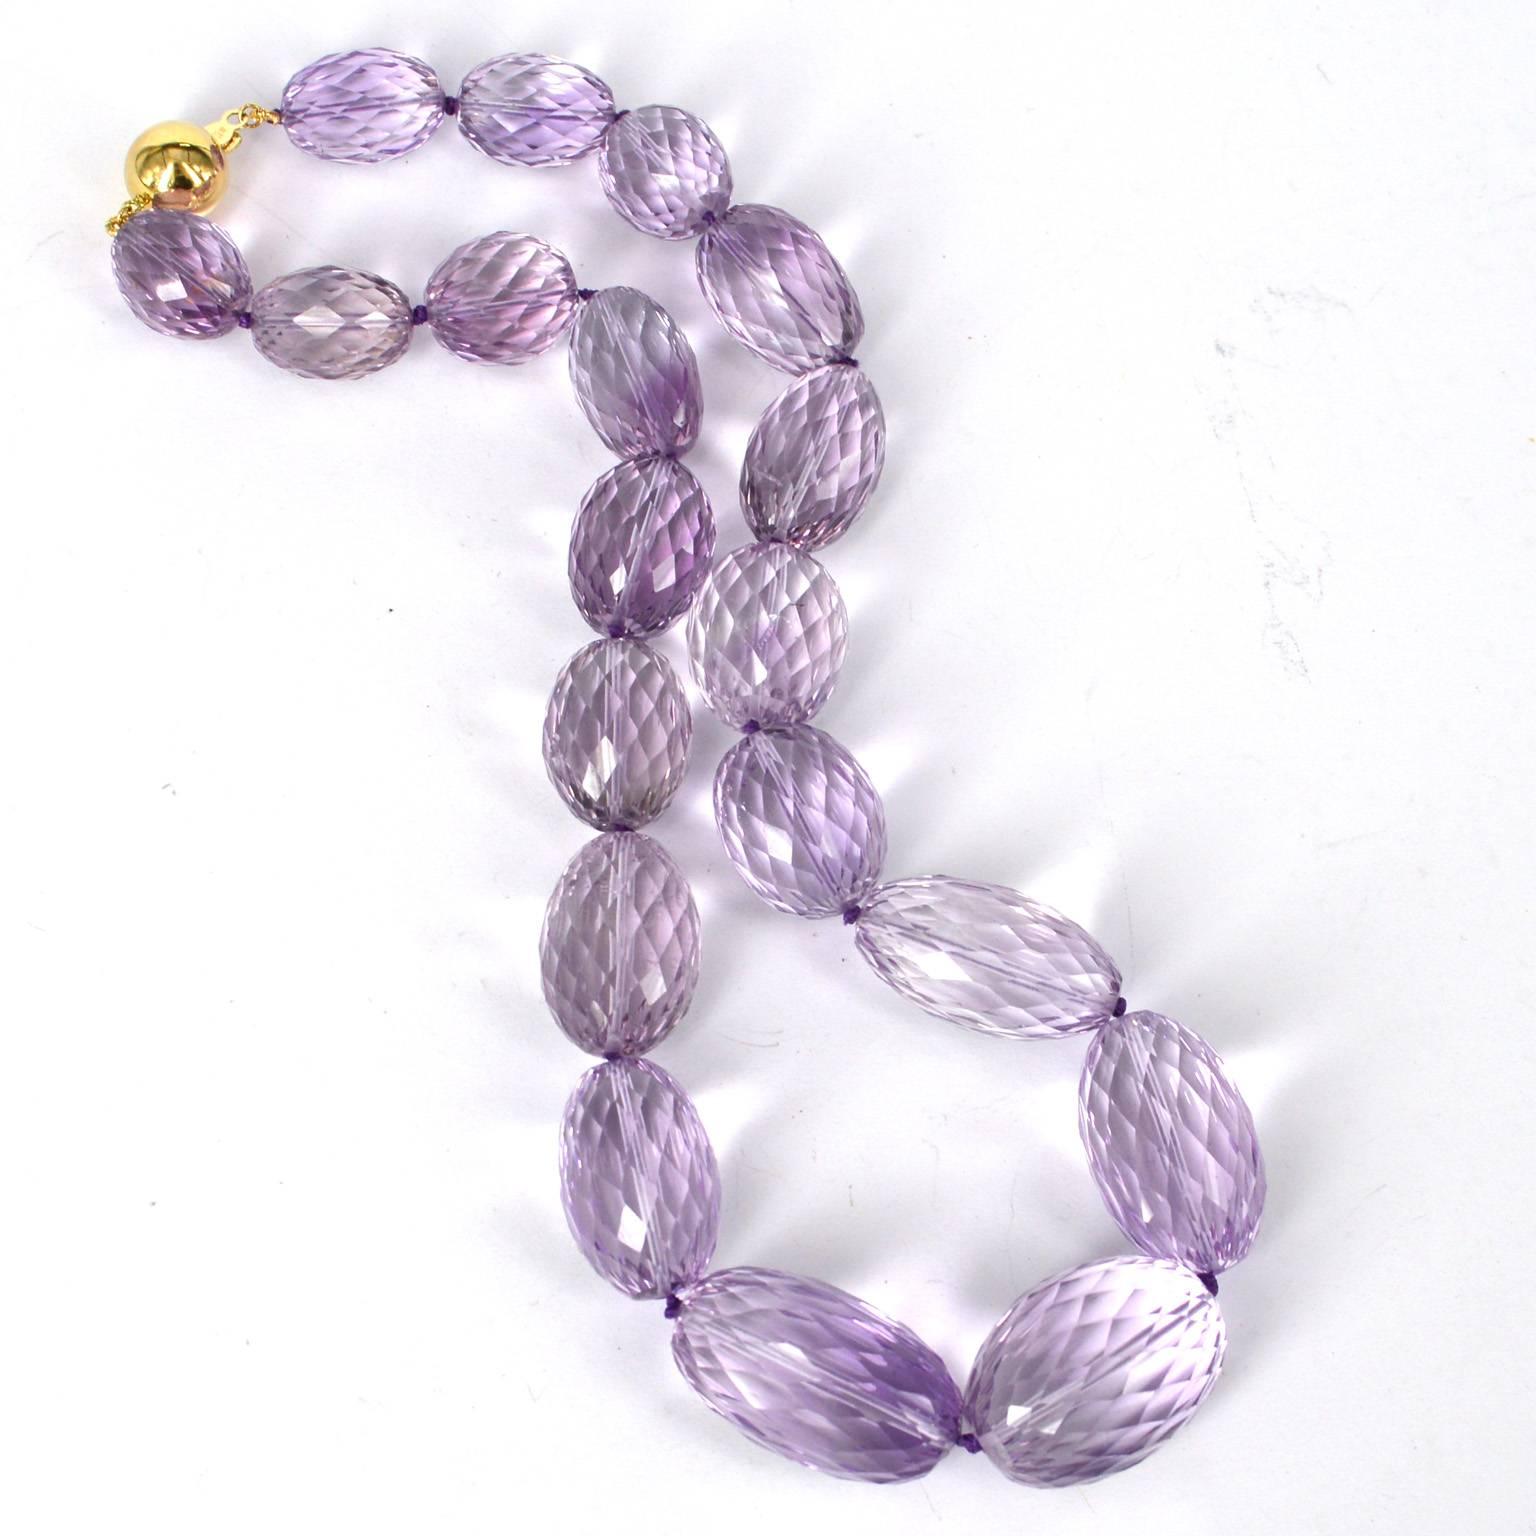  Finest quality large graduating faceted Pink Amethyst stones sizes from 16x13mm up to 28x20mm hand knotted on purple thread for strength and durability with 12mm 9k Gold clasp.
Finished necklace measures 47.5mm